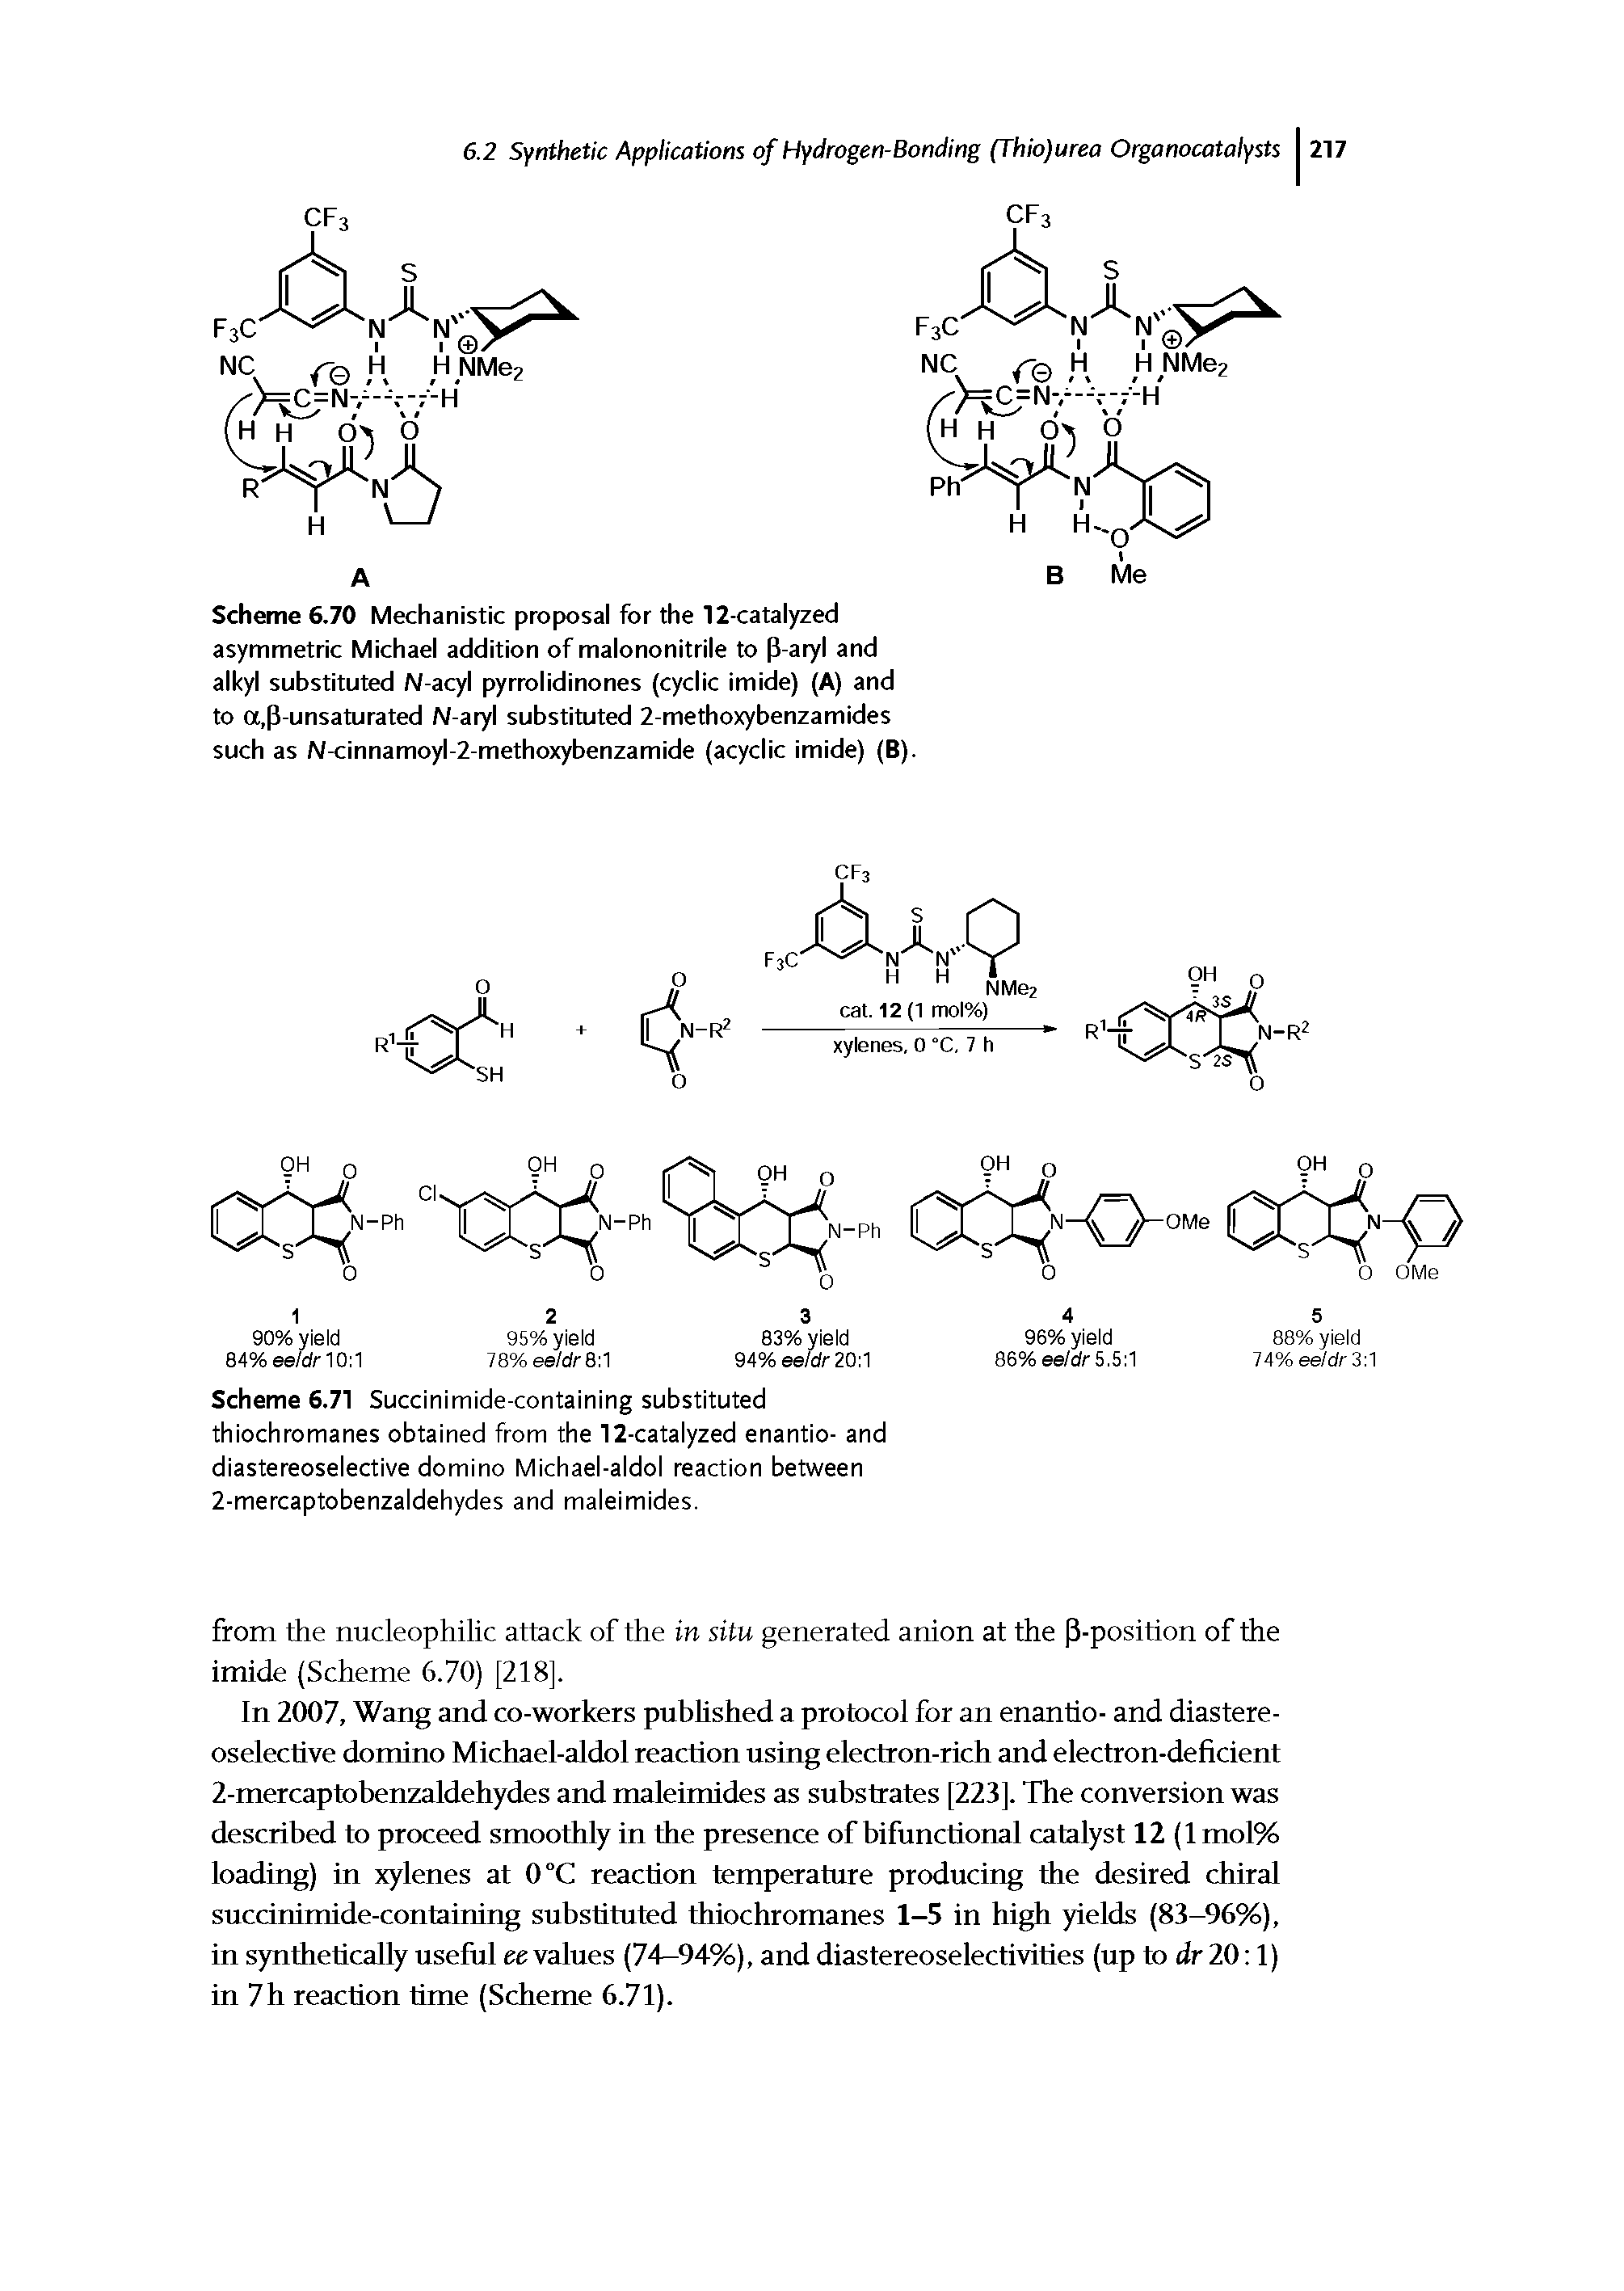 Scheme 6.71 Succinimide-containing substituted thiochromanes obtained from the 12-catalyzed enantio- and diastereoselective domino Michael-aldol reaction between 2-mercaptobenzaldehydes and maleimides.